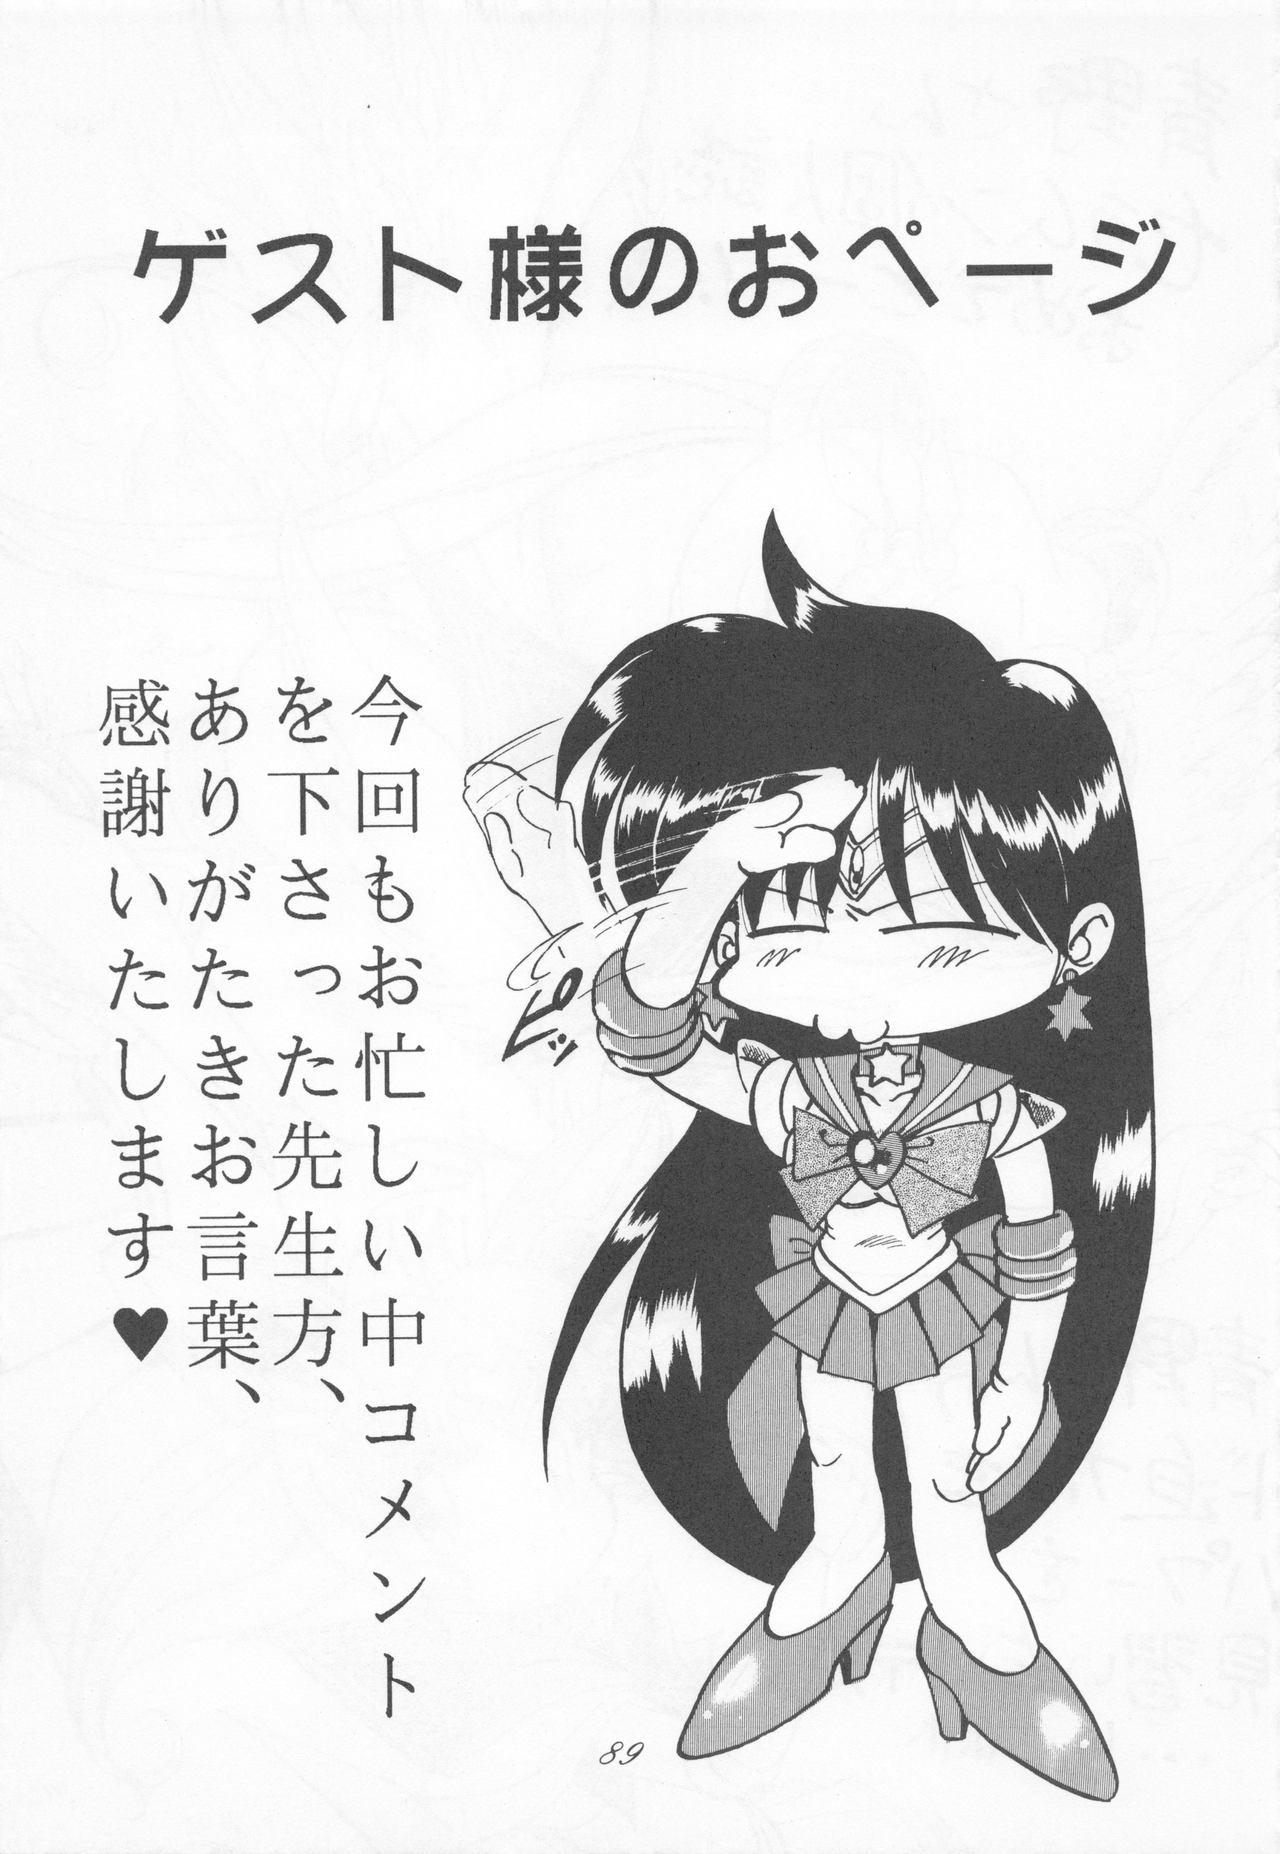 Sailor Moon 1 Page Gekijou P2 - SAILOR MOON ONE PAGE THEATER II 88